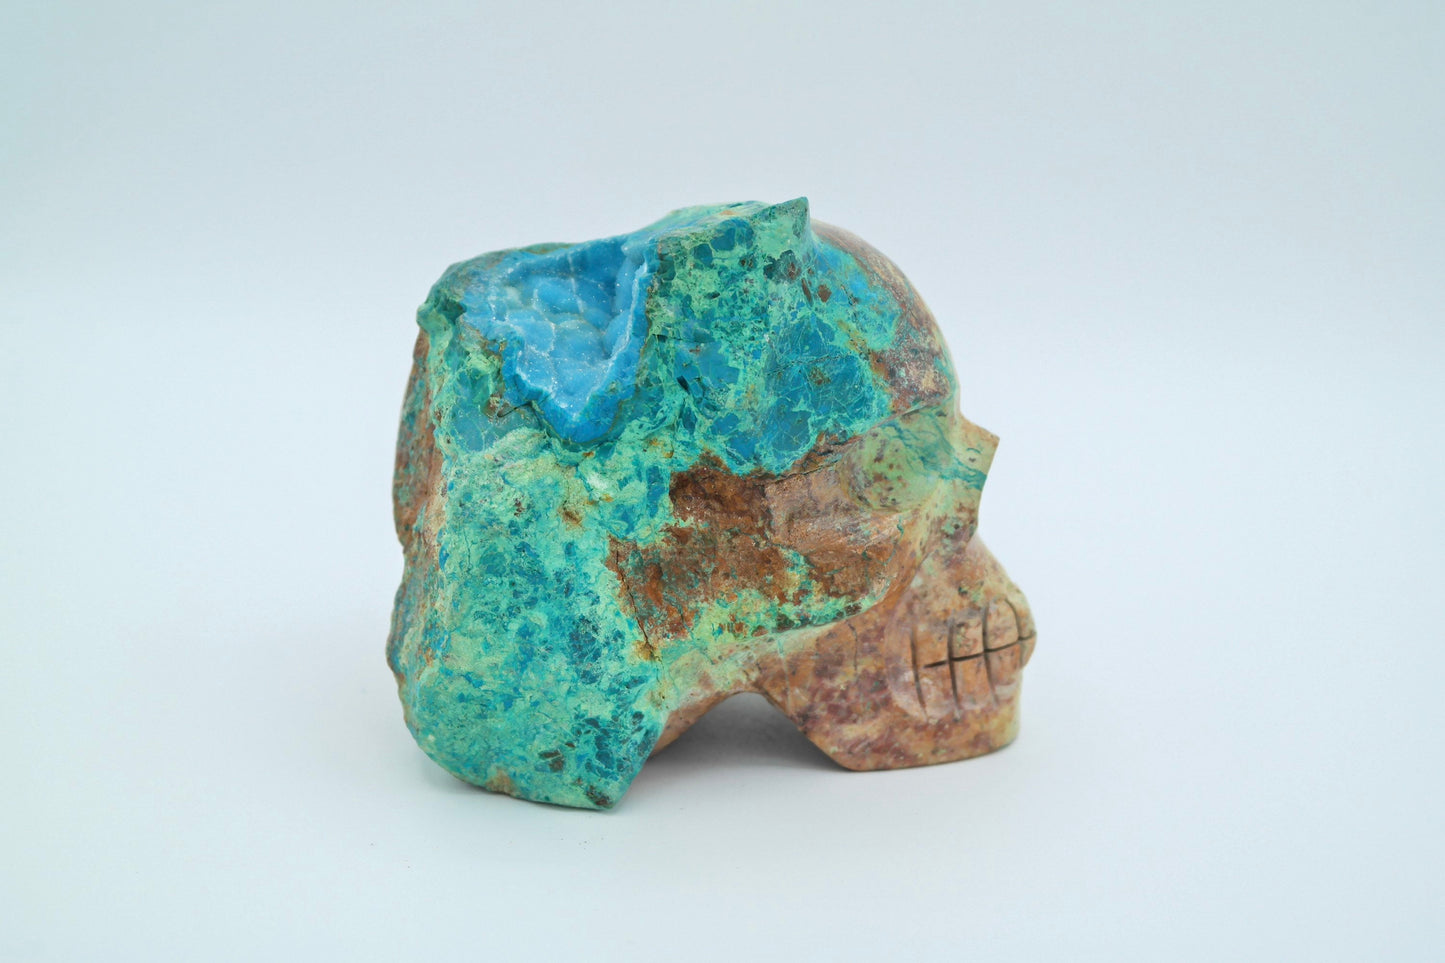 Skull carving made of Chrysocolla Turquoise